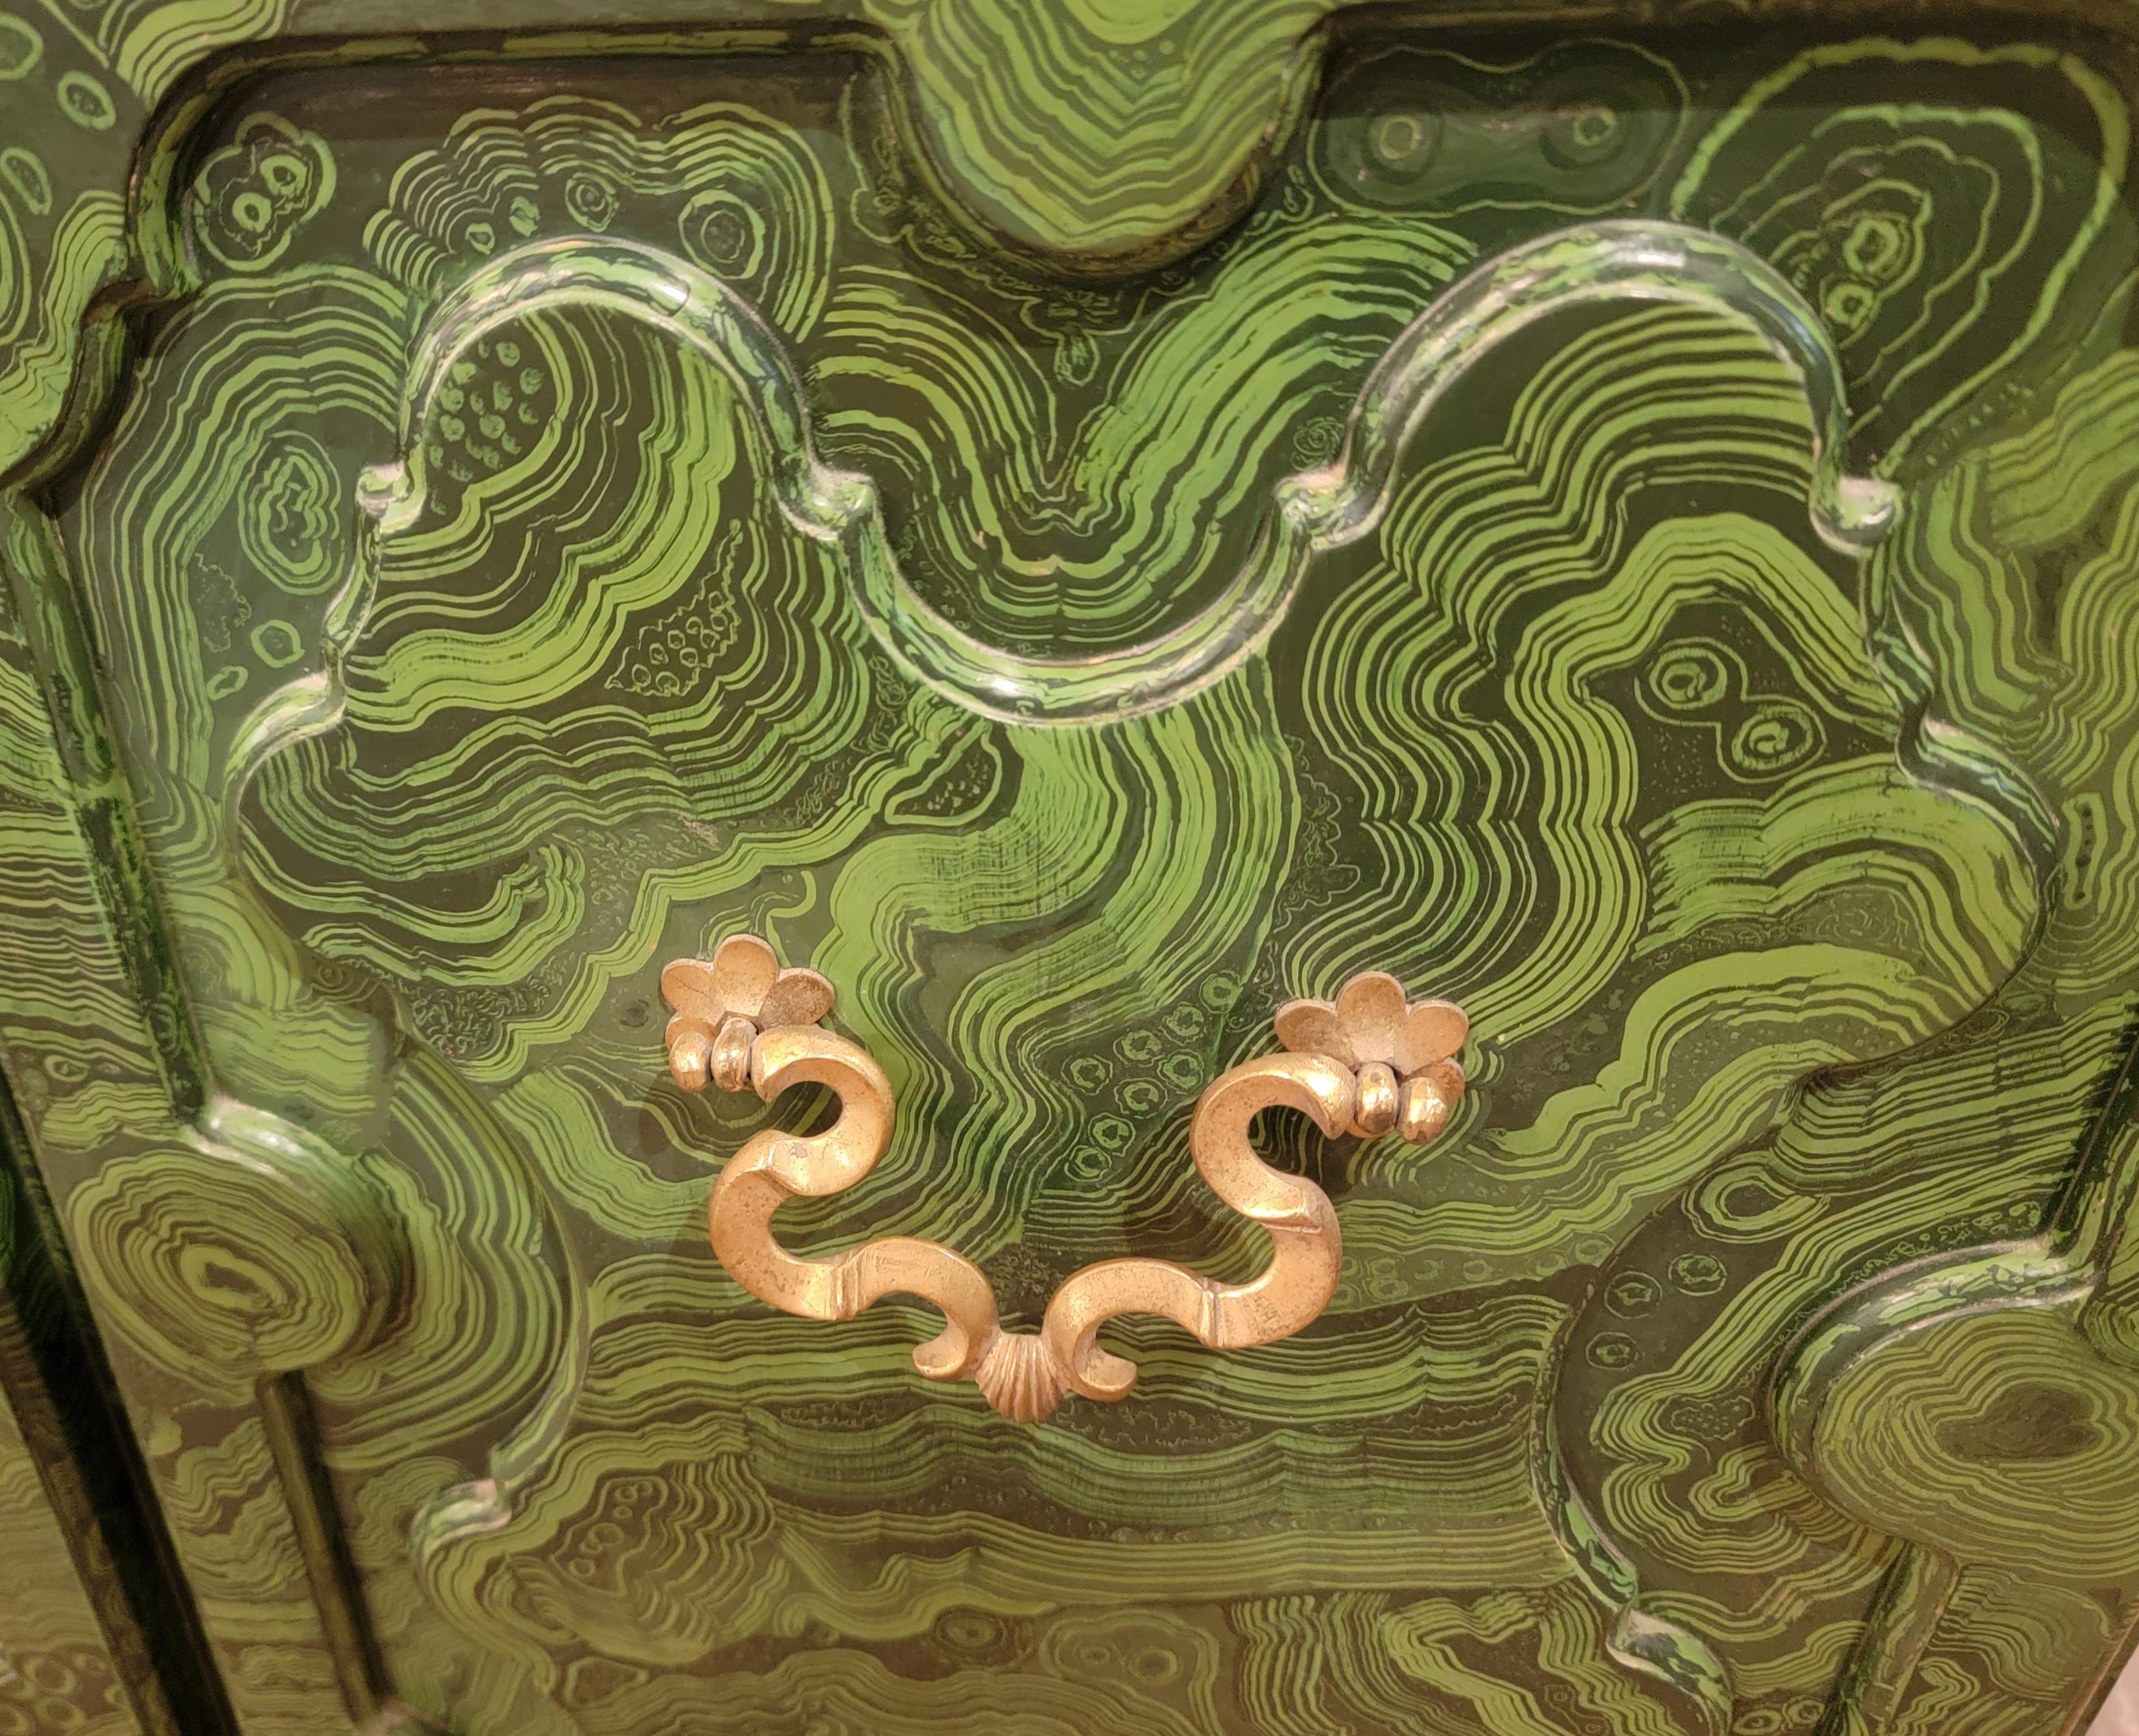 Hand Painted Baker 4 Door Credenza With Ornate Brass Handles by Tony Duquette In Good Condition For Sale In Pasadena, CA